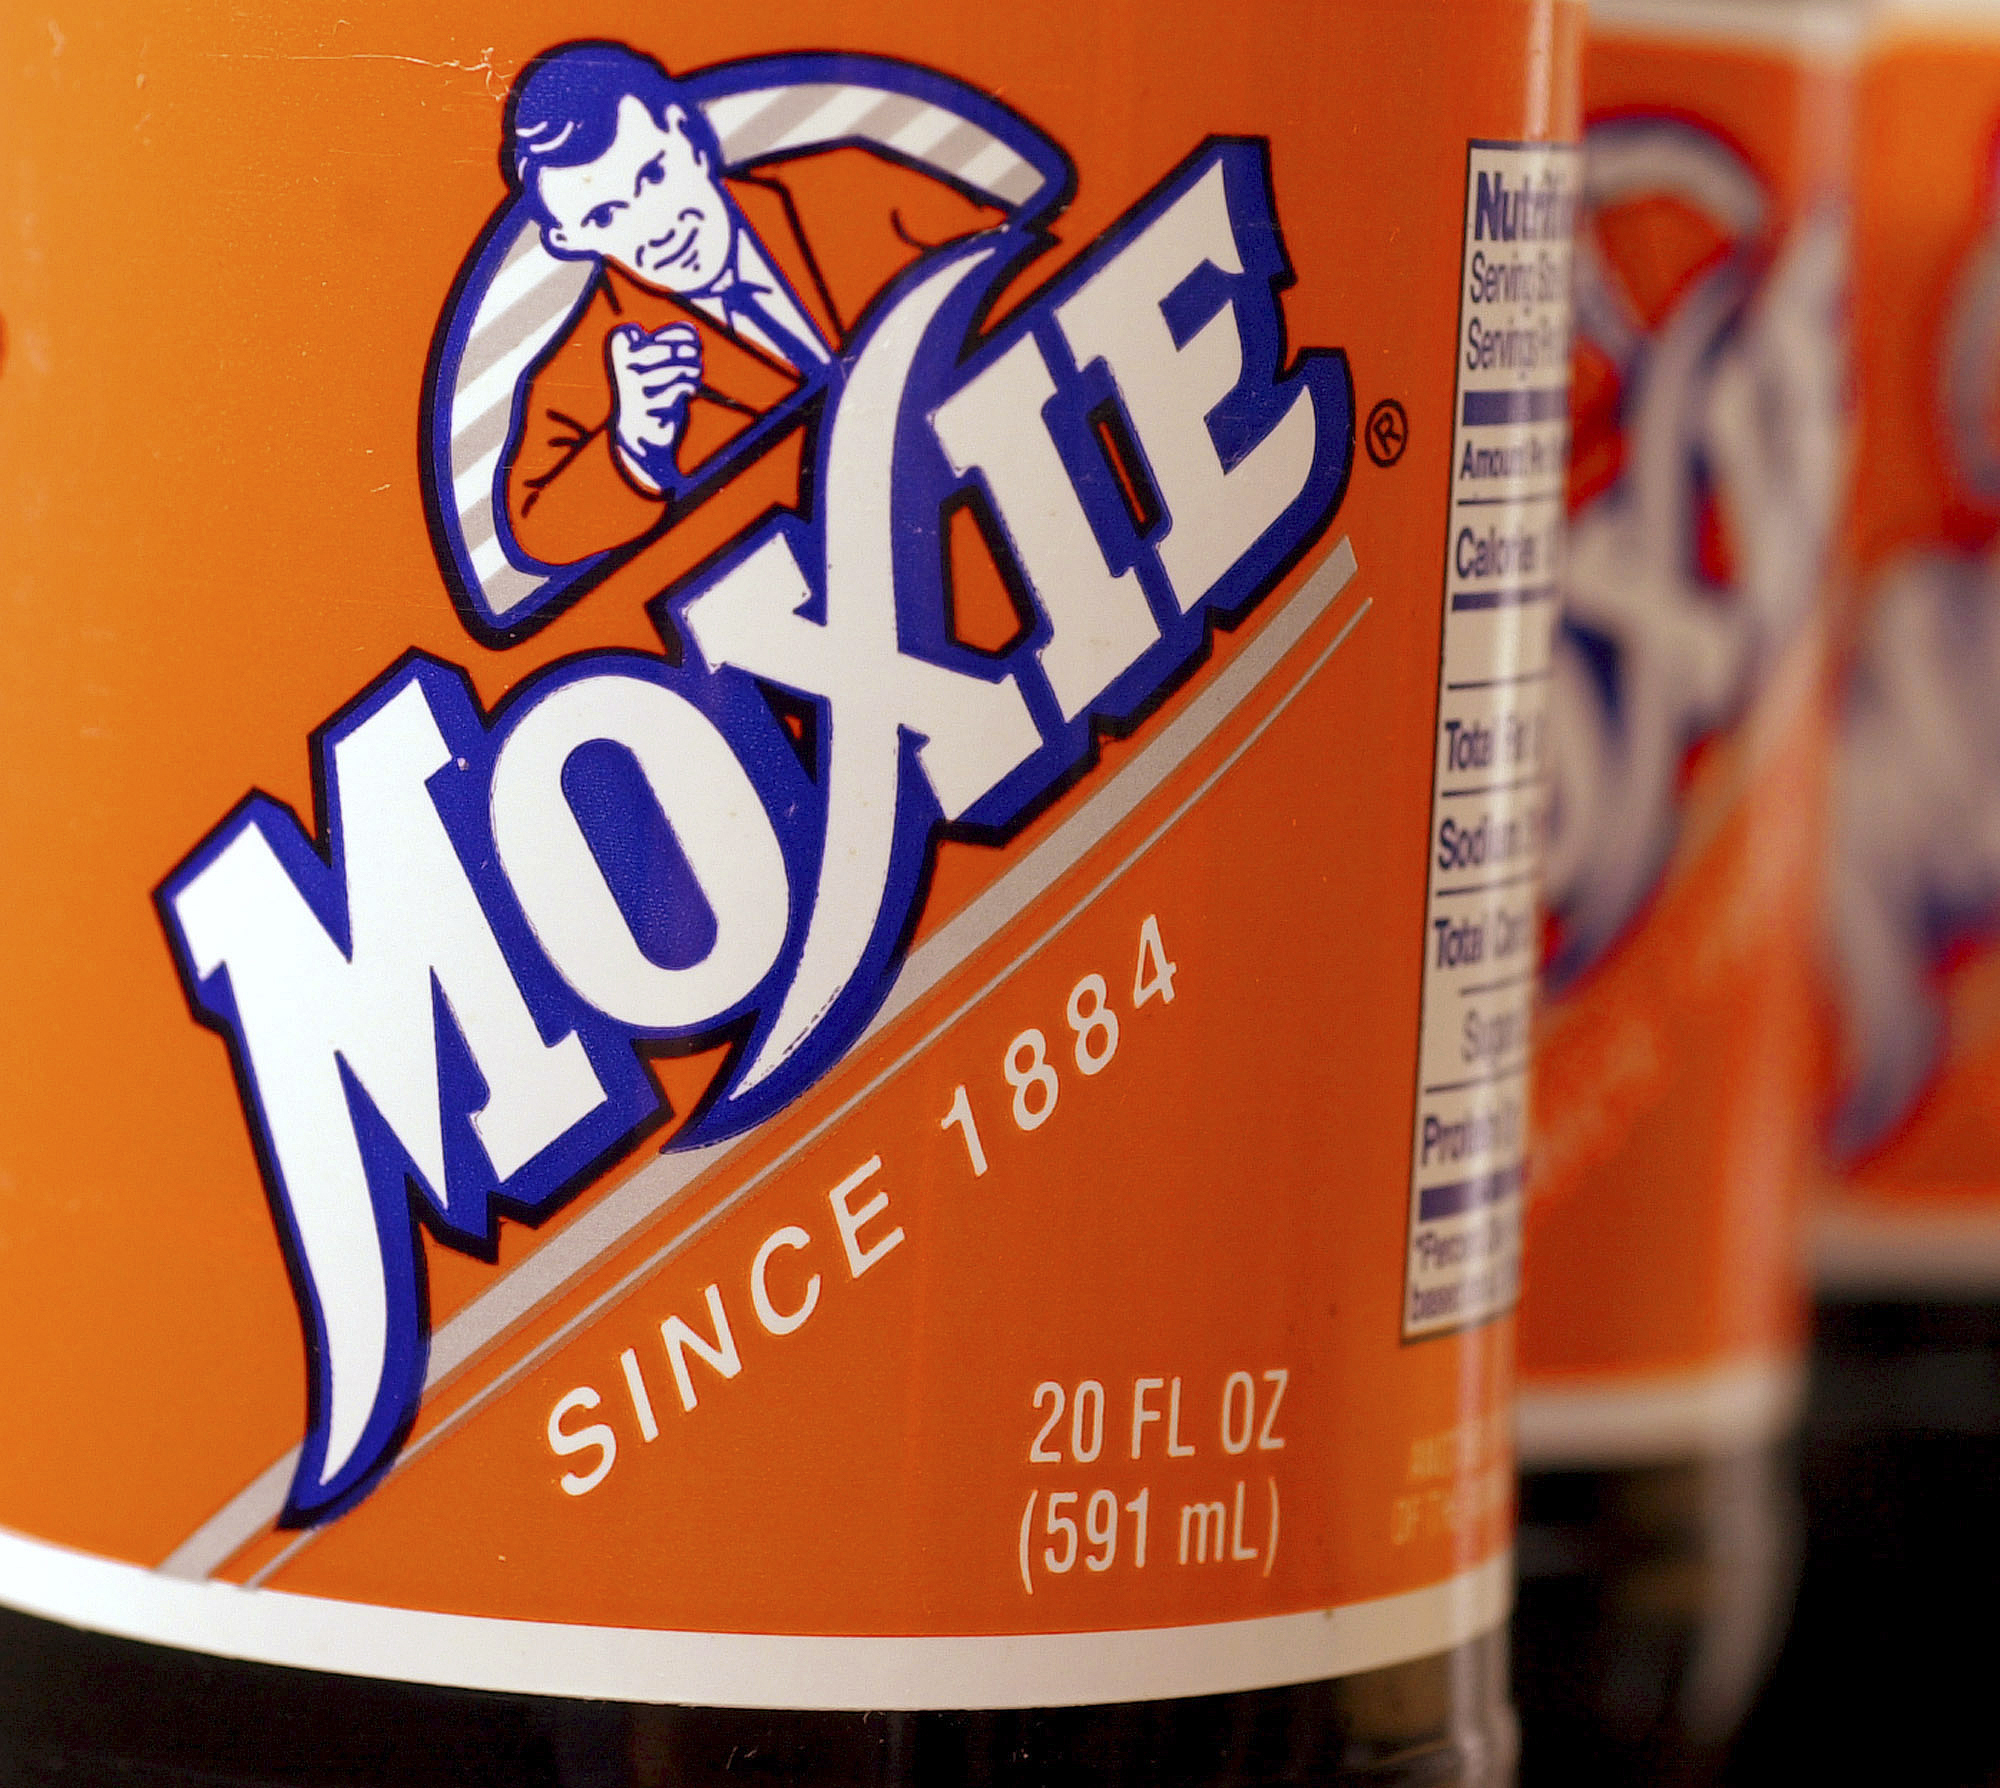 FILE — Bottles of the soft drink Moxie sit together, May 27, 2005, in West Bath, Maine. Moxie, a polarizing beverage that is the state's official soft drink, is in short supply because of supply chain woes, Tuesday, Feb. 8, 2022. The soda is beloved by thousands of Mainers and is the subject of a summer festival. (AP Photo/Pat Wellenbach, File)